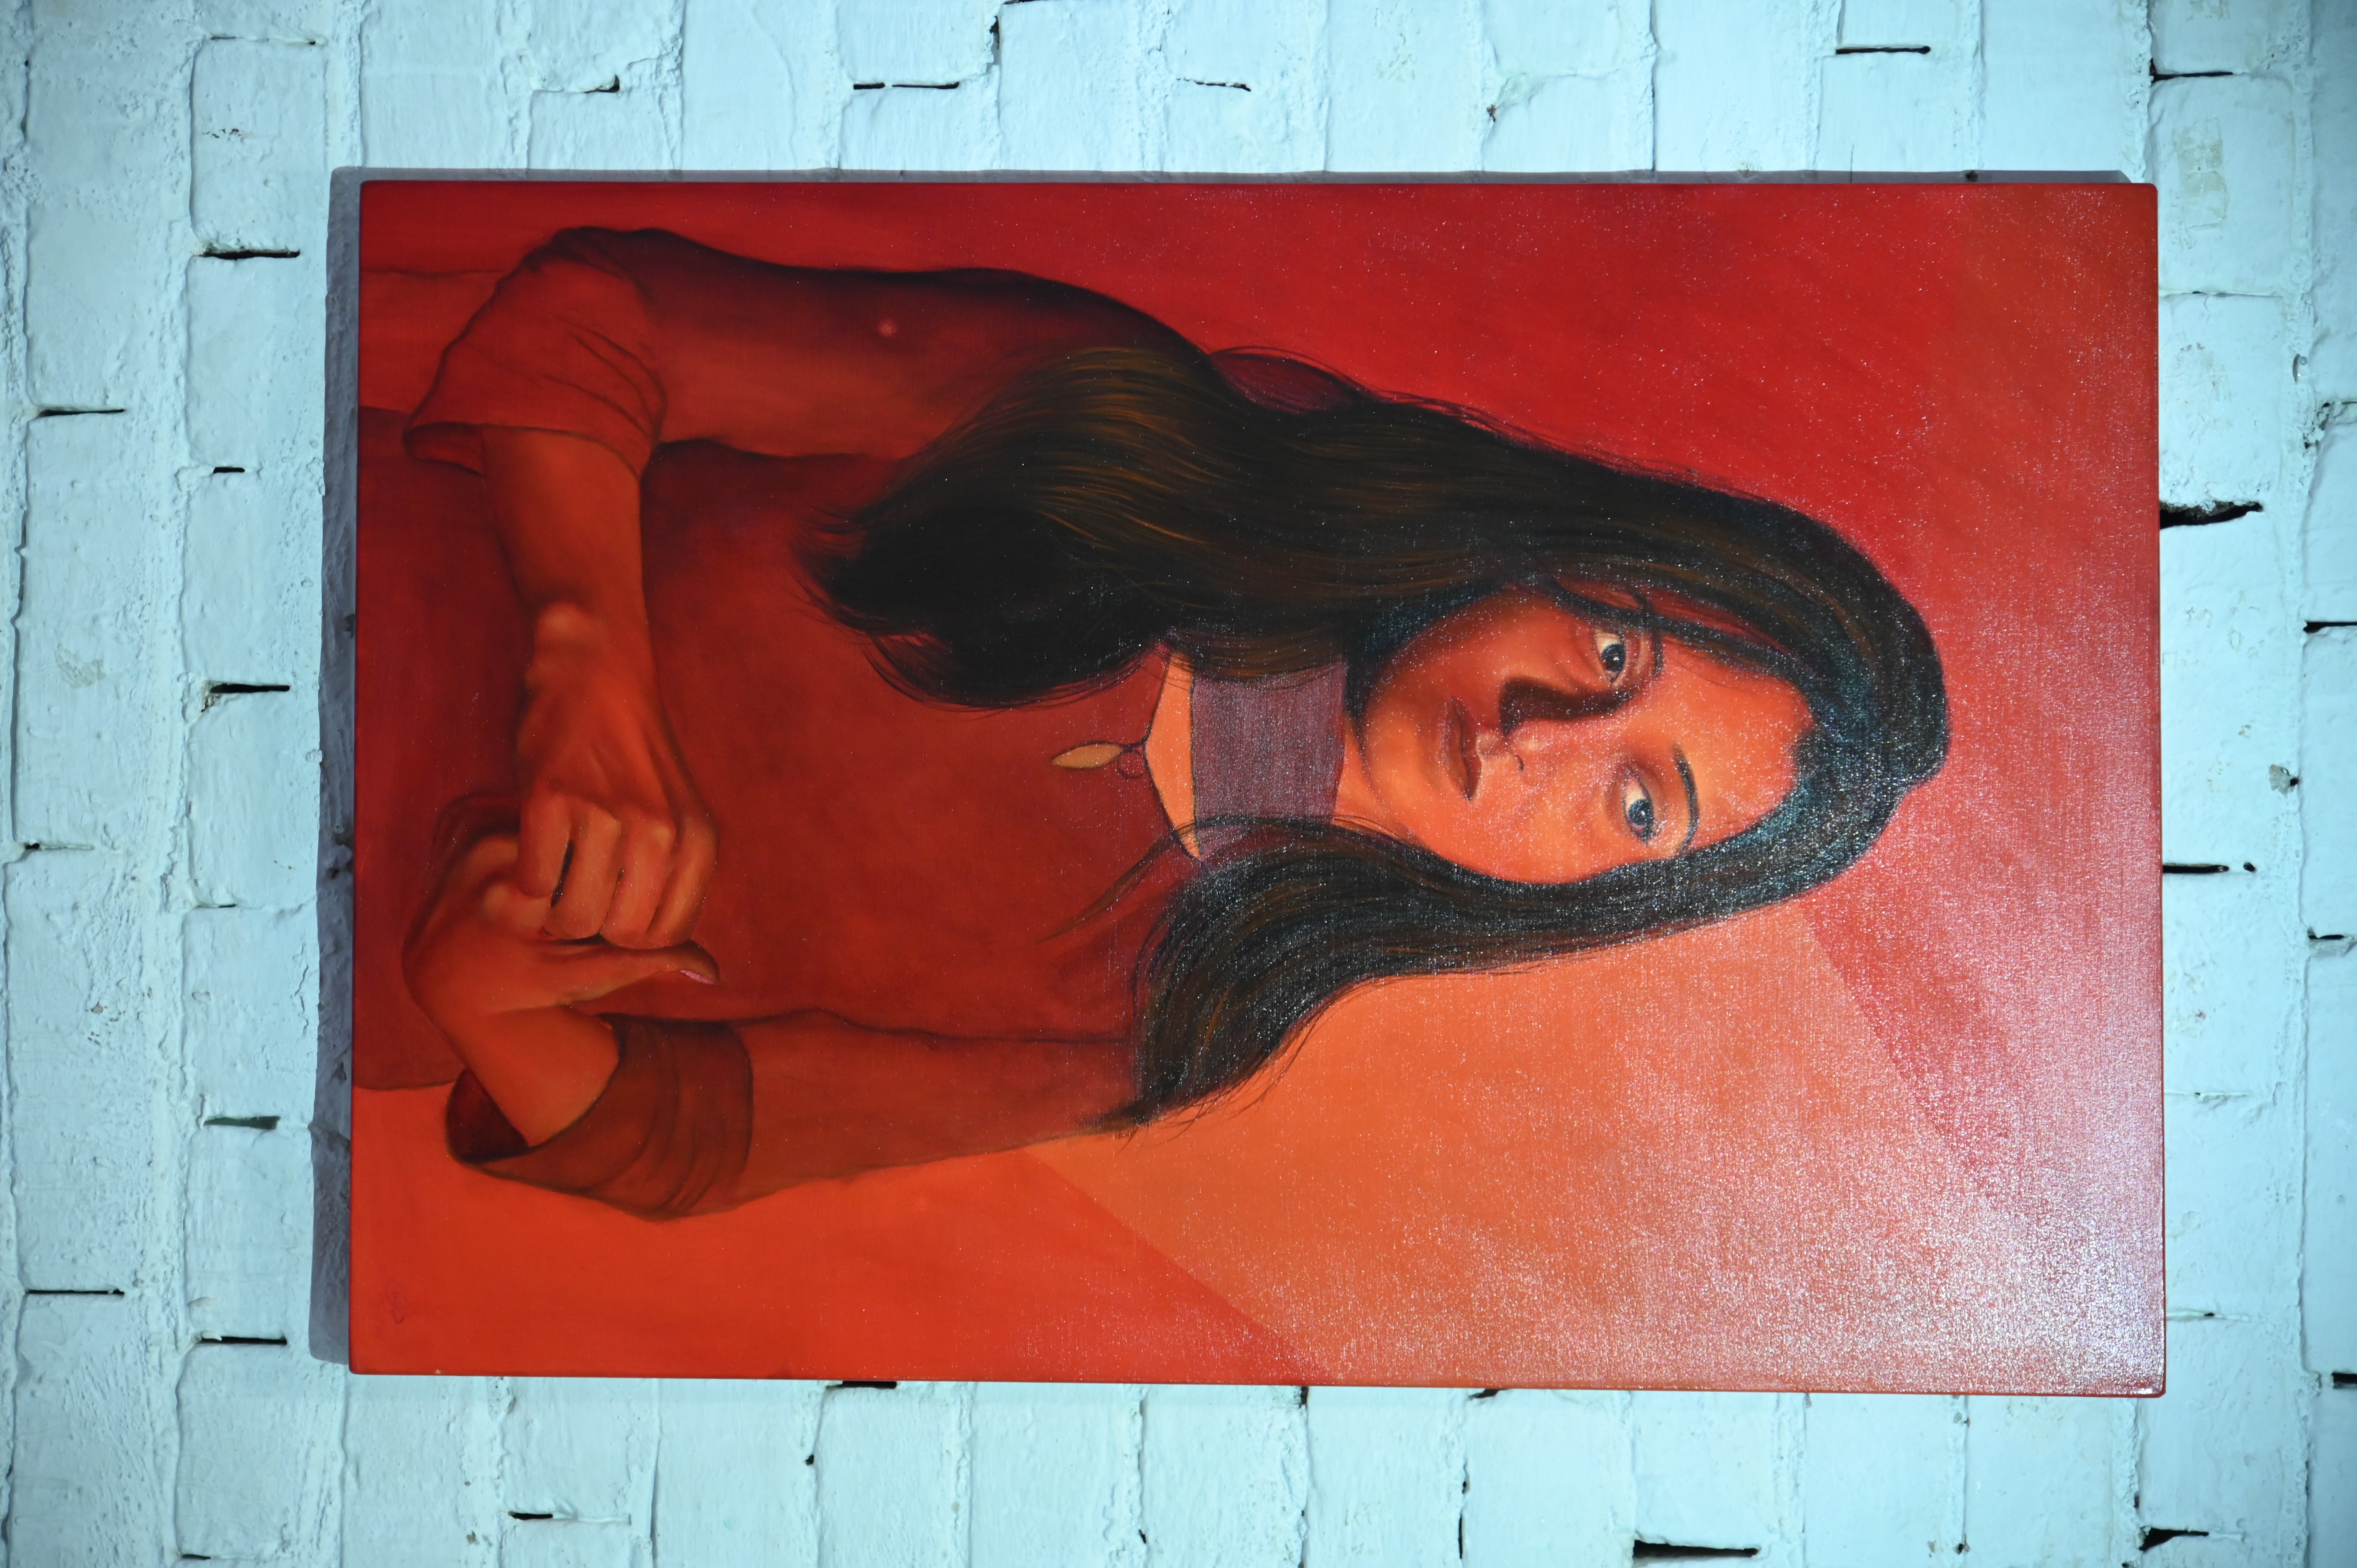 A beautiful painting of a young girl displayed at an Art Exhibition by Hussain Jamil at PNCA